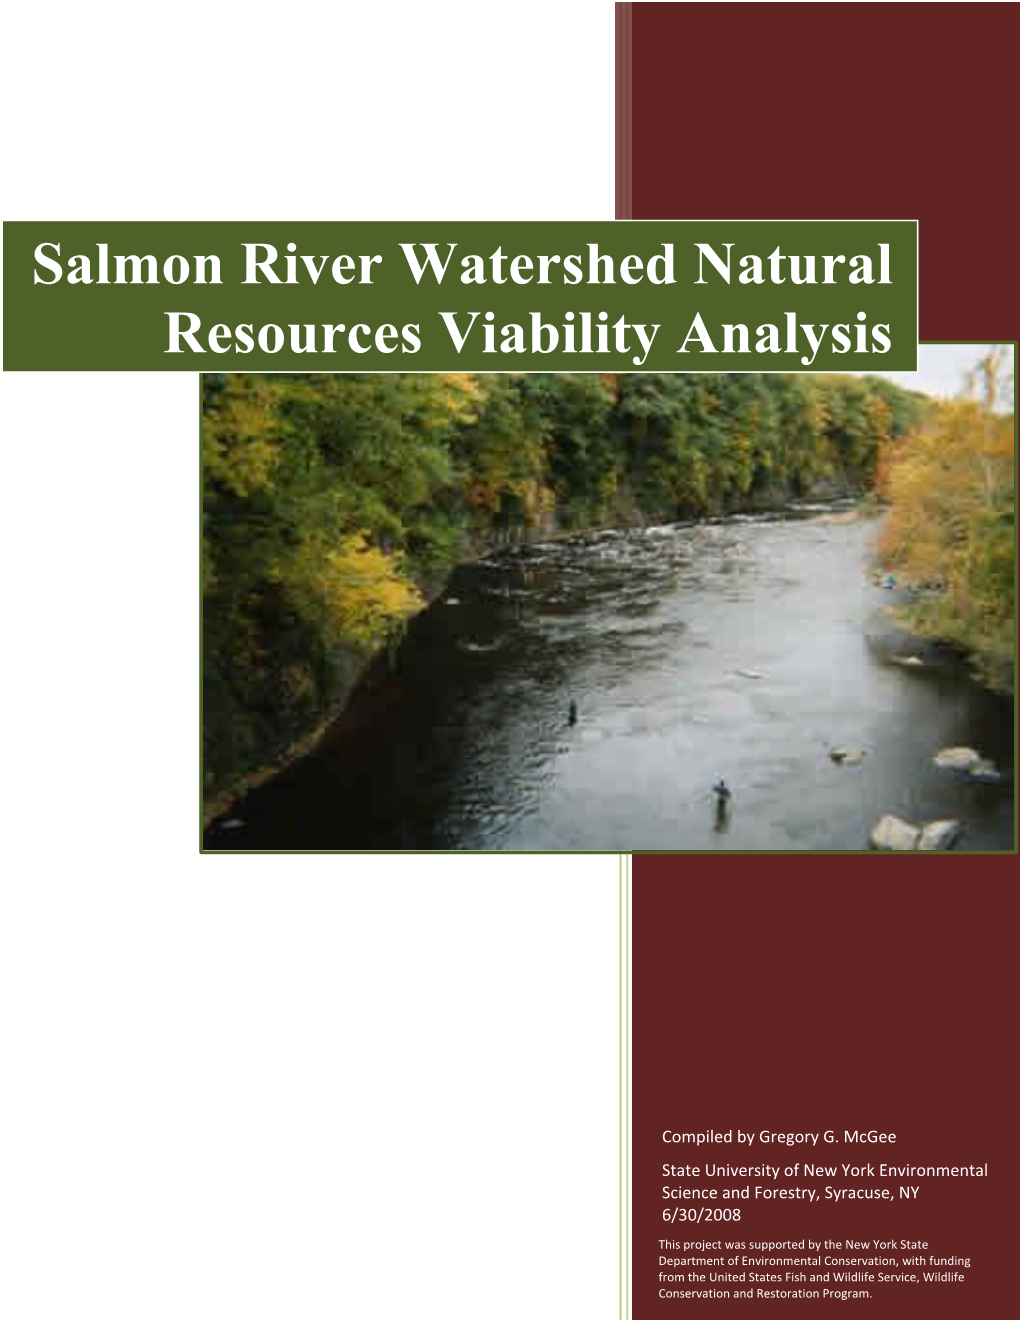 Salmon River Watershed Natural Resources Viability Analysis